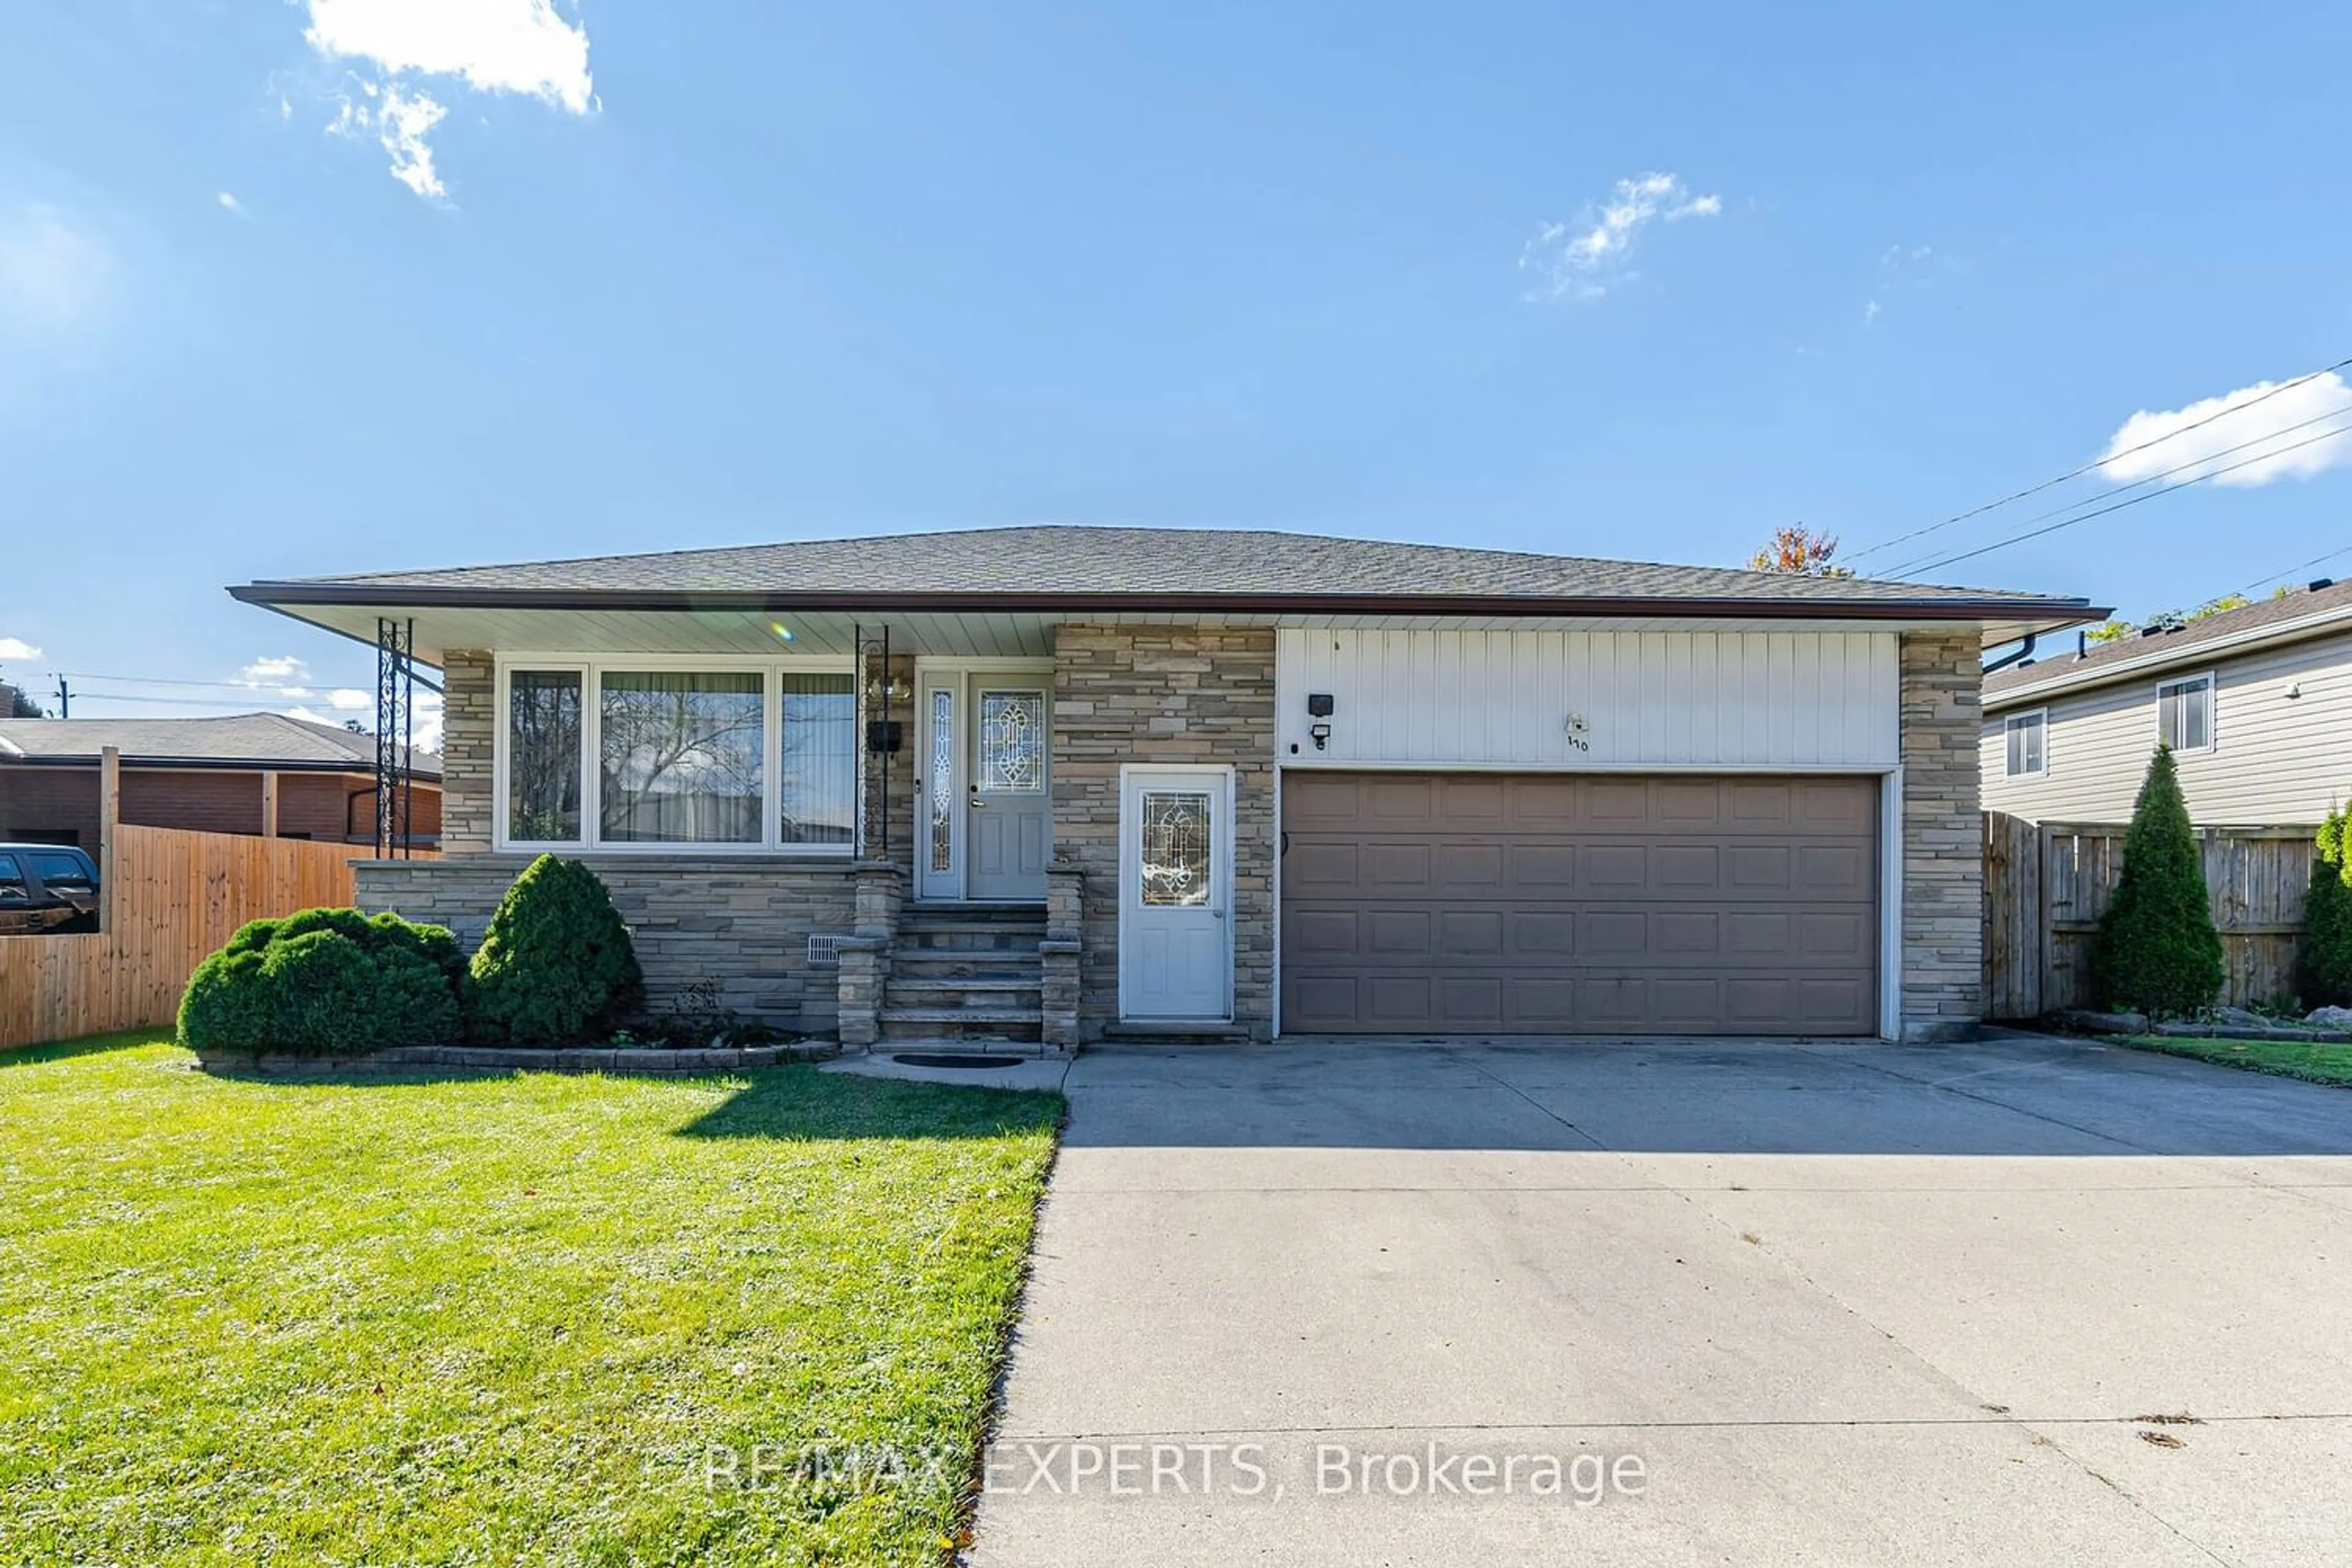 Frontside or backside of a home for 170 Iva St, Welland Ontario L3B 1W6